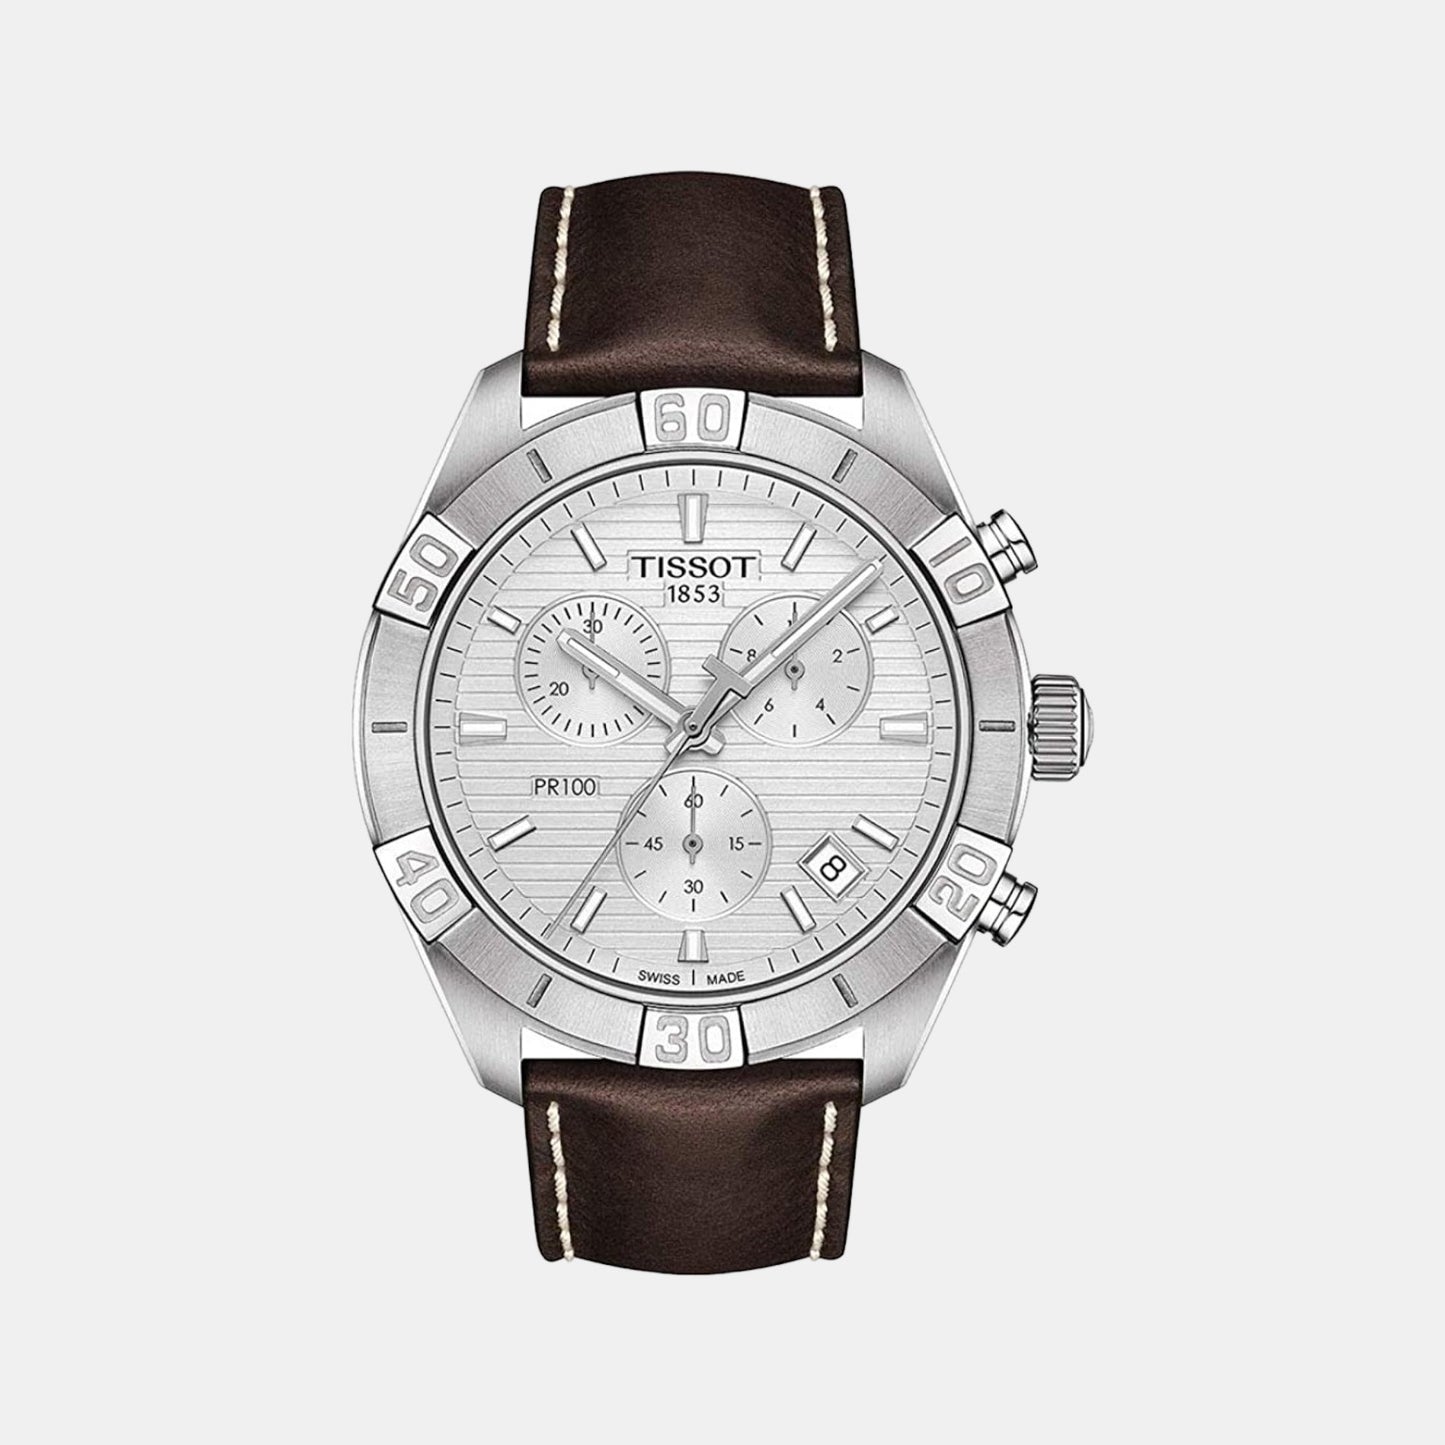 PR 100 Male Chronograph Leather Watch T1016171603100